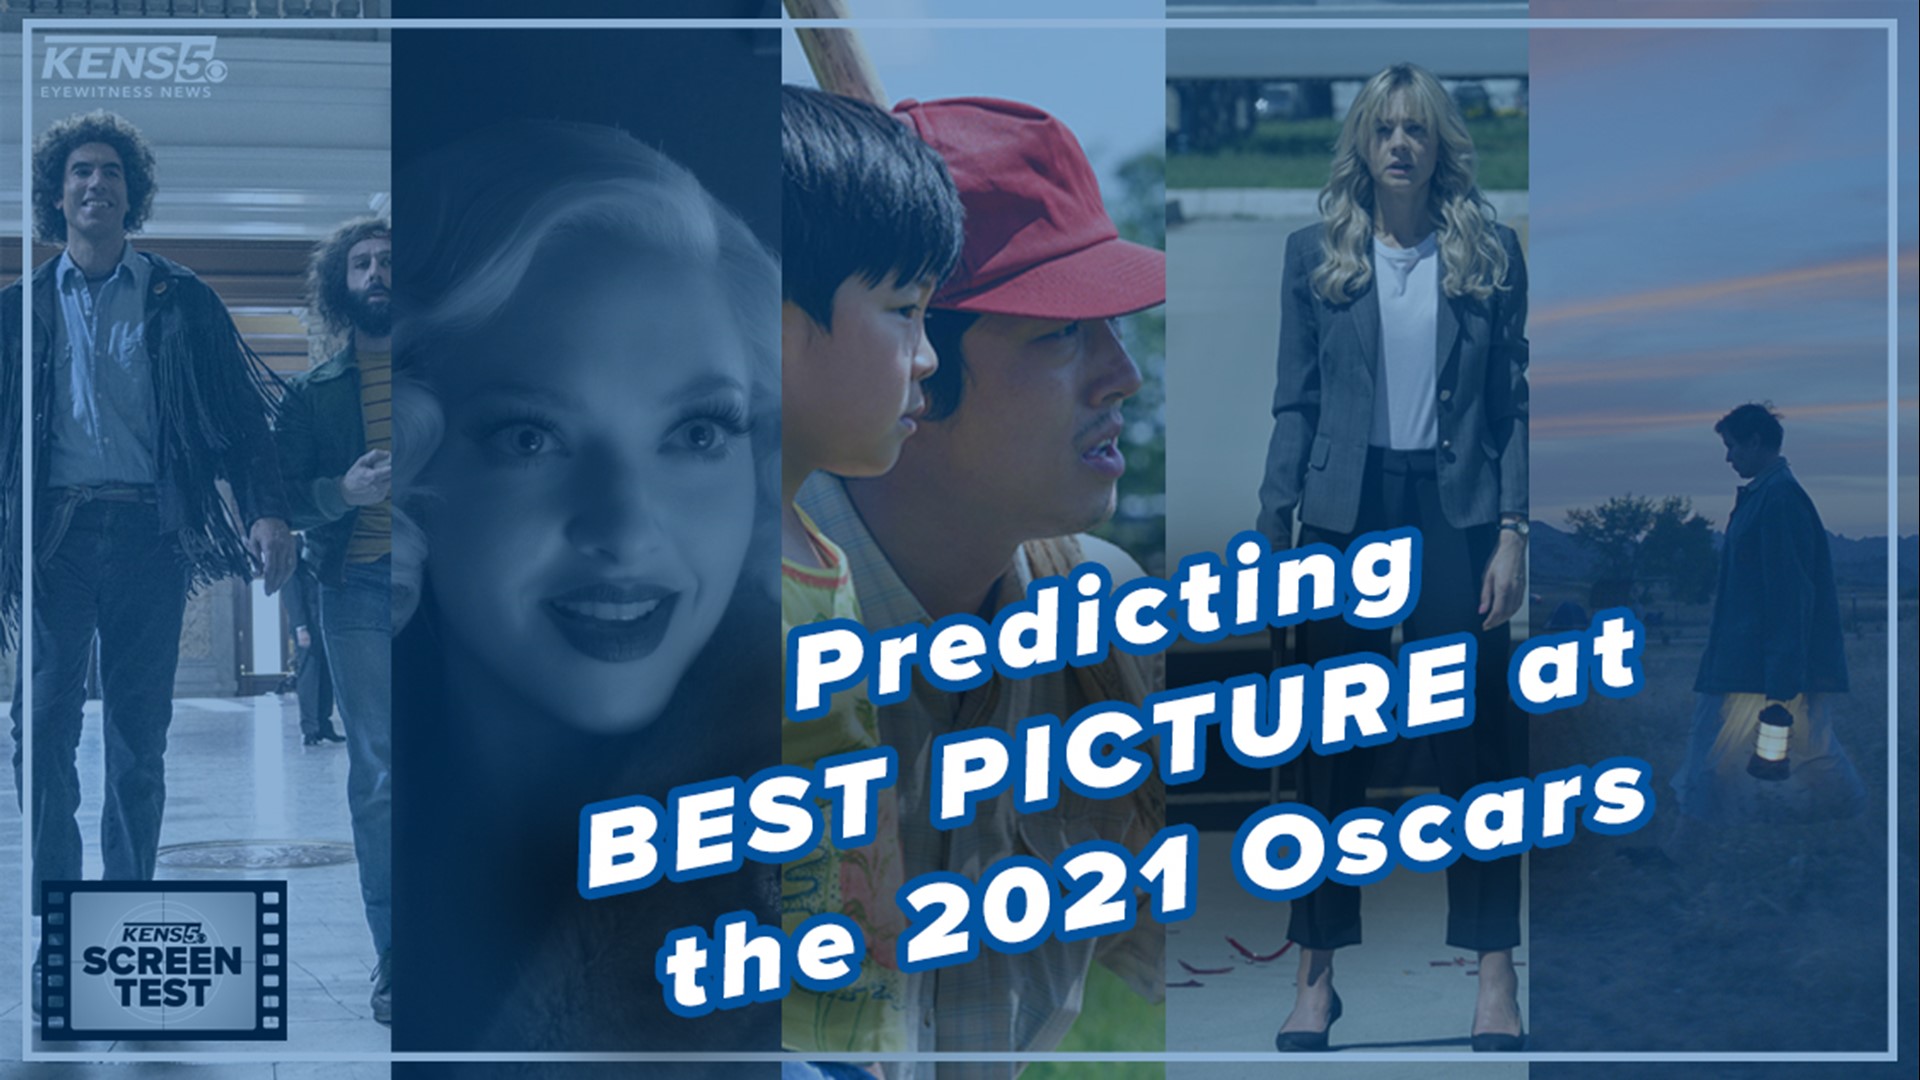 Eight films are vying for Best Picture at this year's Oscars. We break down the frontrunners, as well as who we'd want to see win.